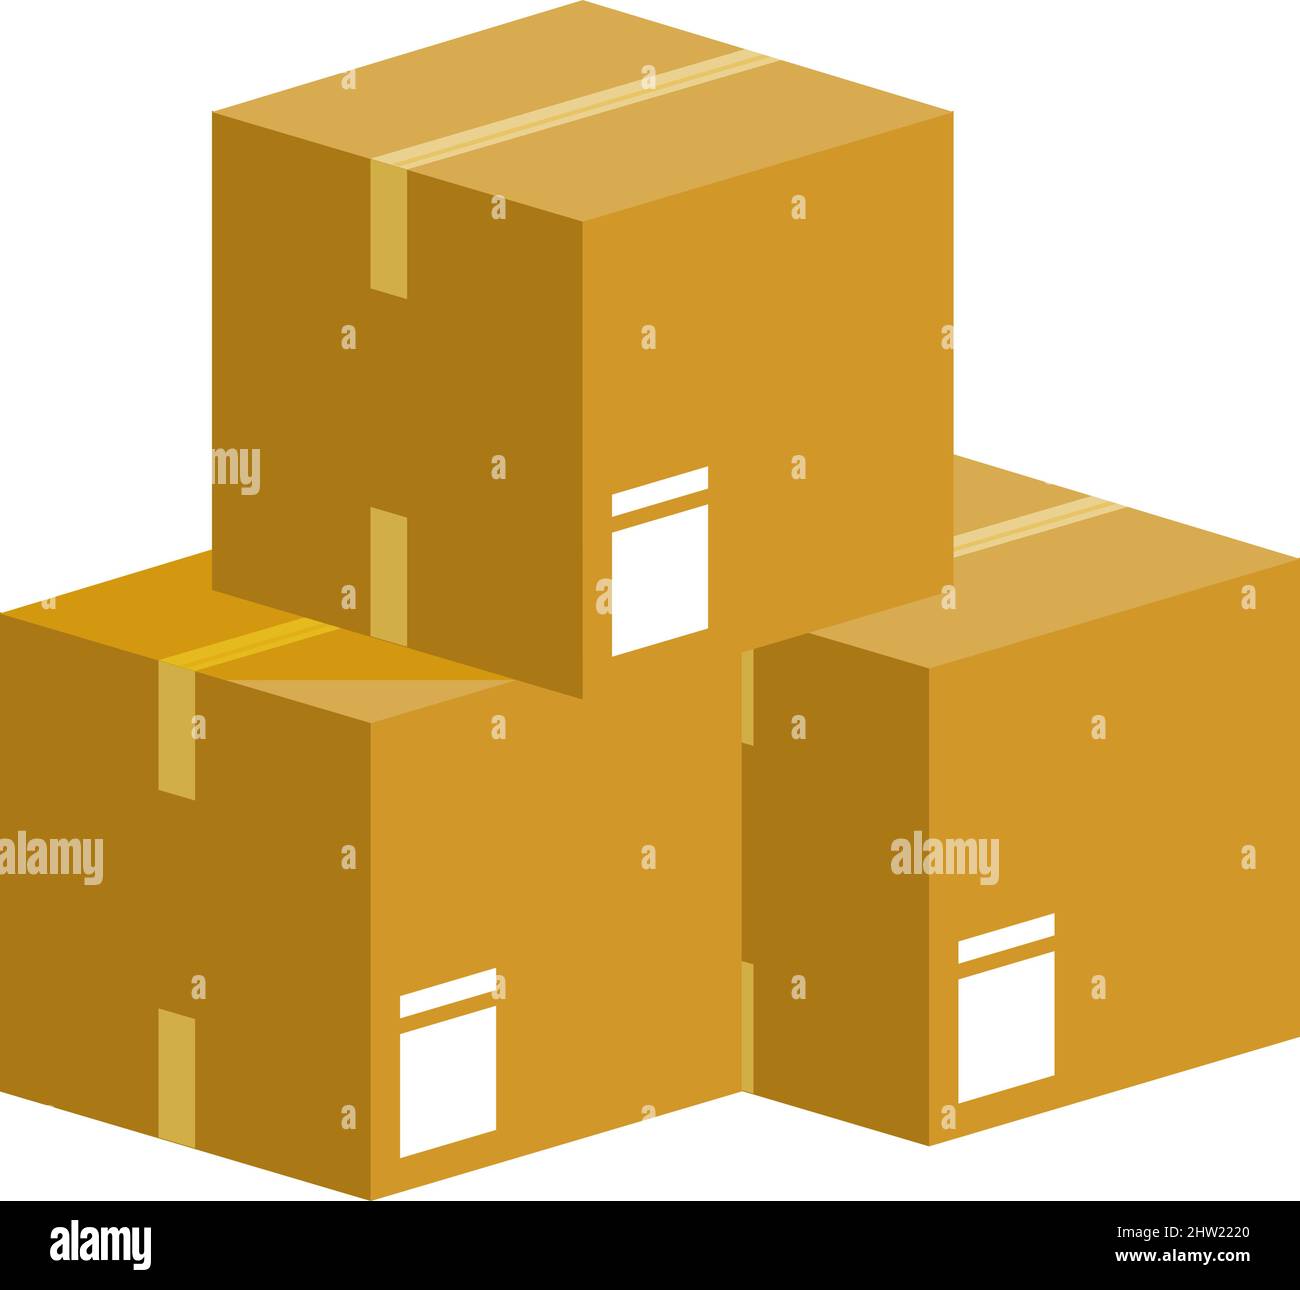 Cardboard boxes stack. Pile of paper packages. Storage symbol Stock Vector